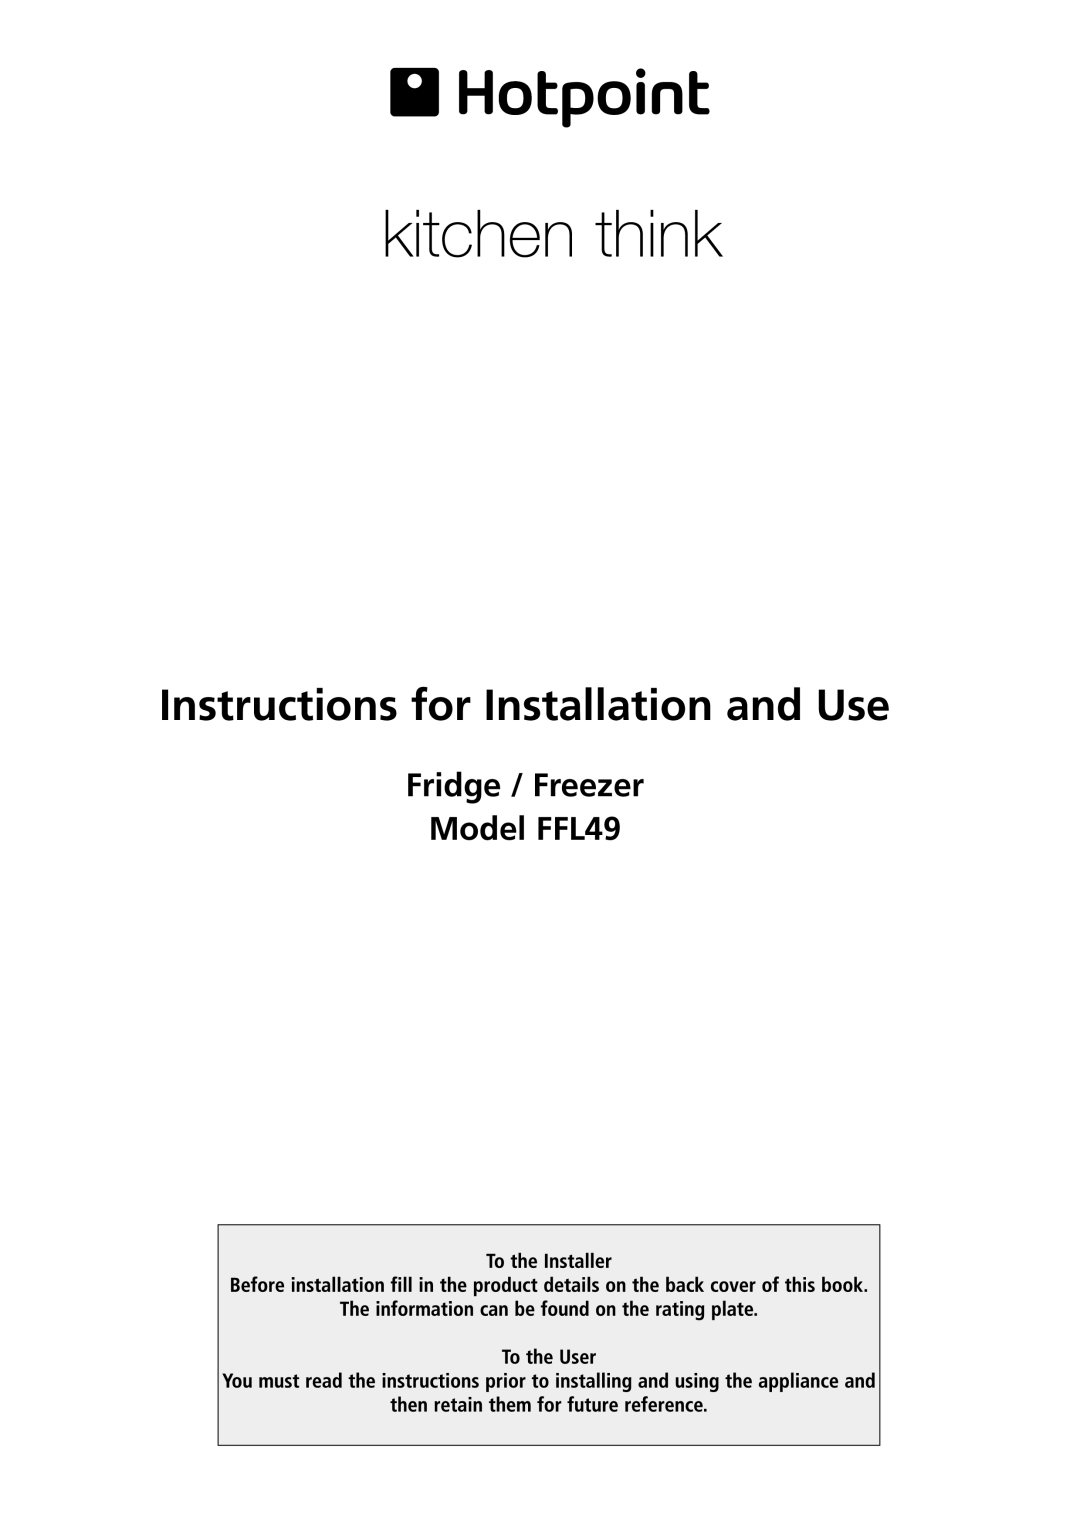 Hotpoint manual Instructions for Installation and Use, Fridge / Freezer Model FFL49 